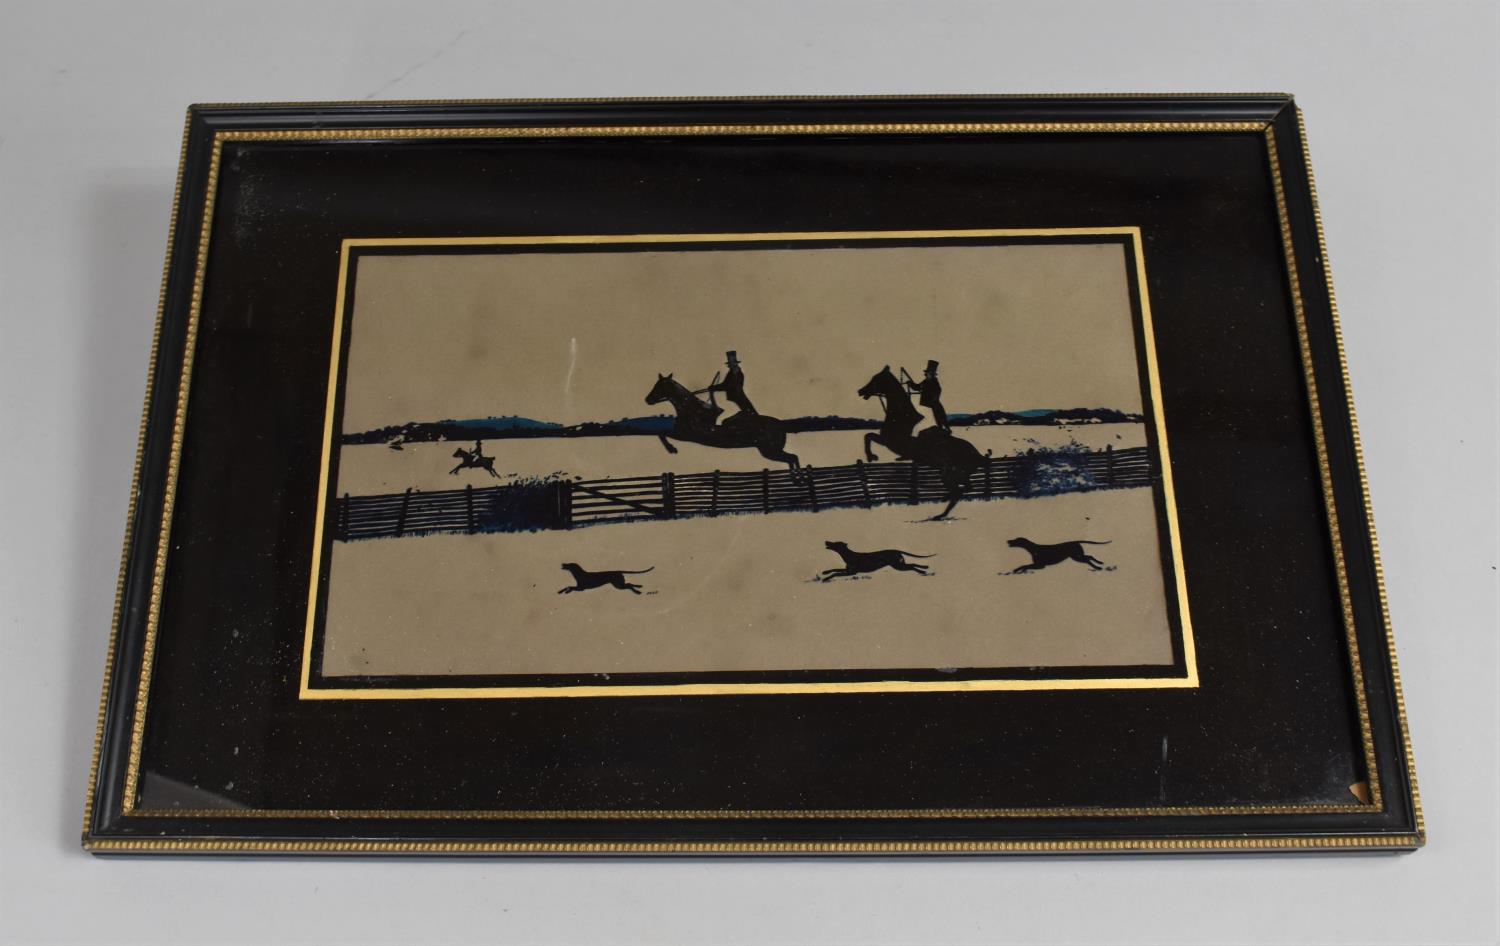 An Early 20th Century Hunting Silhouette, 39.5x26.5cm